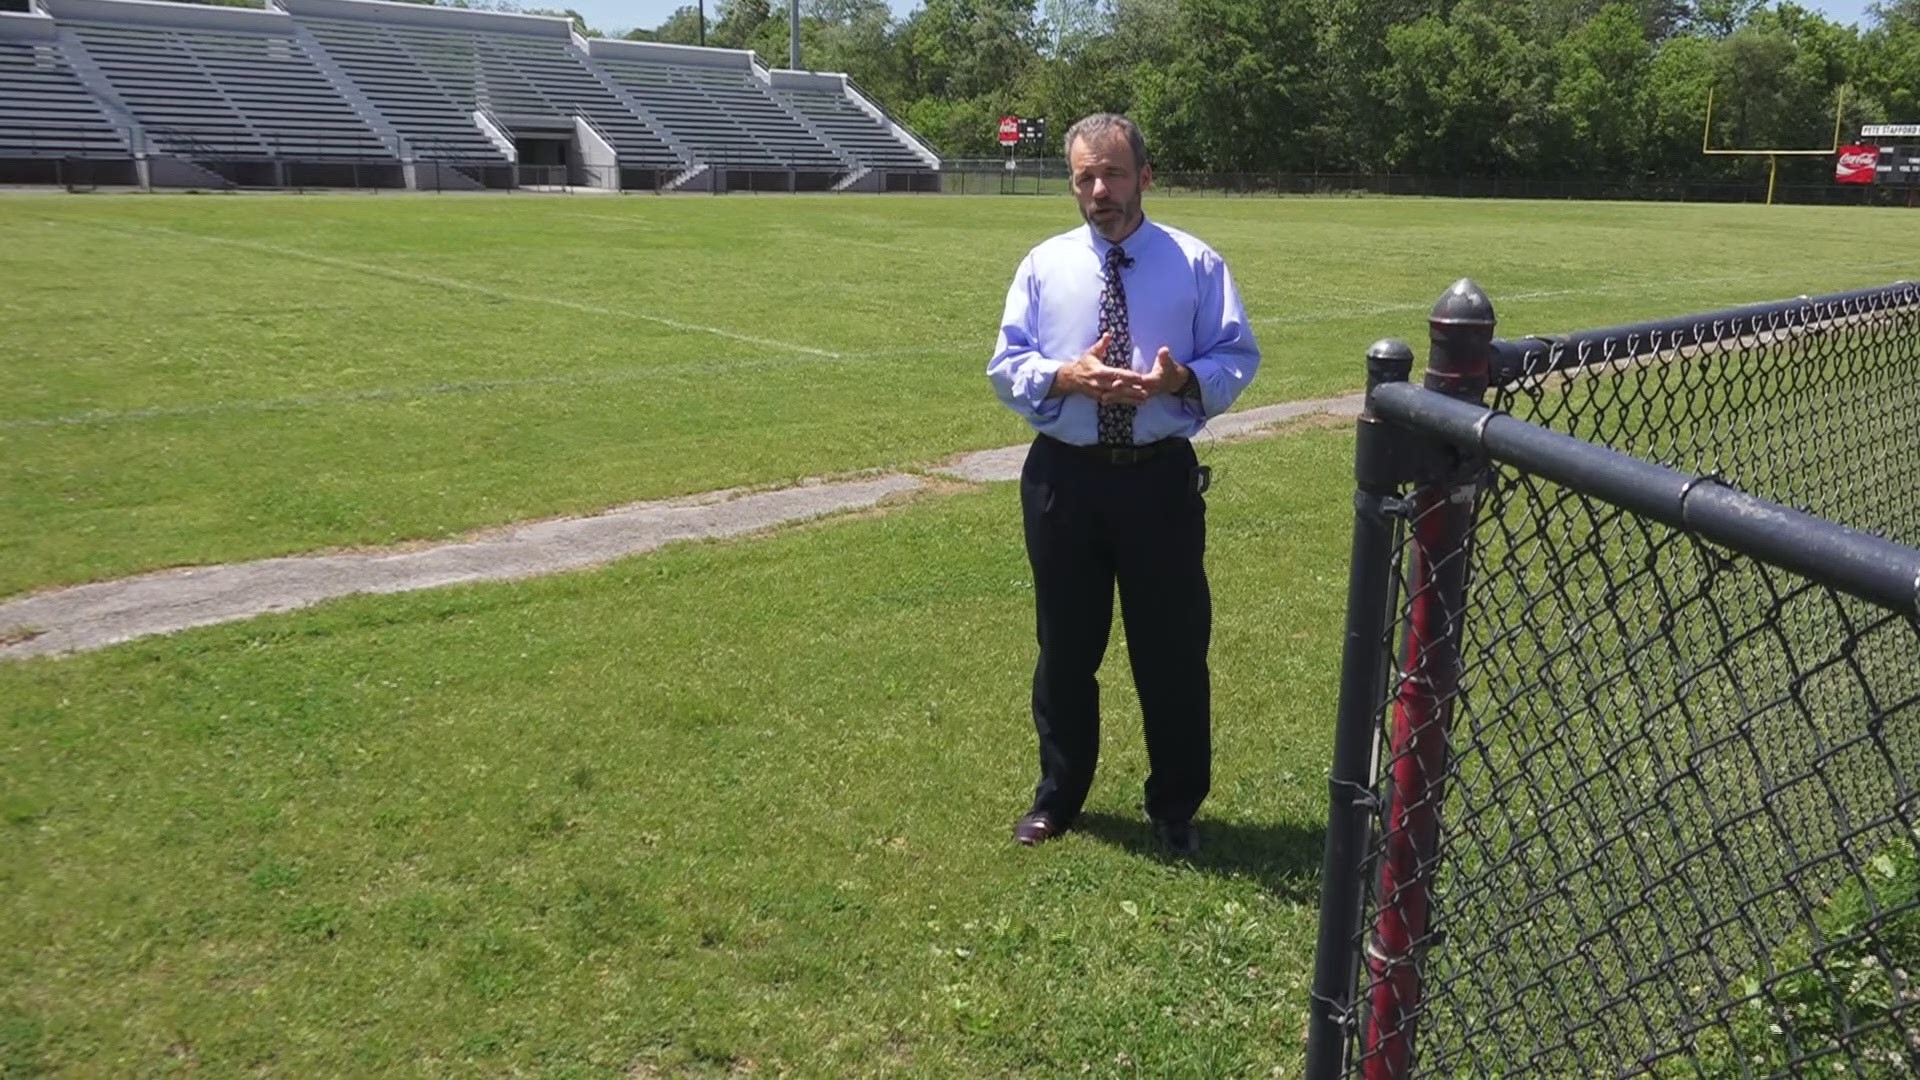 Knox Co. Mayor Tim Burchett presented his budget proposal to Knox County commissioners on Monday. It included funding to turn South-Doyle Middle School's football stadium into a BMX racing facility. (Aired May 1, 2017)